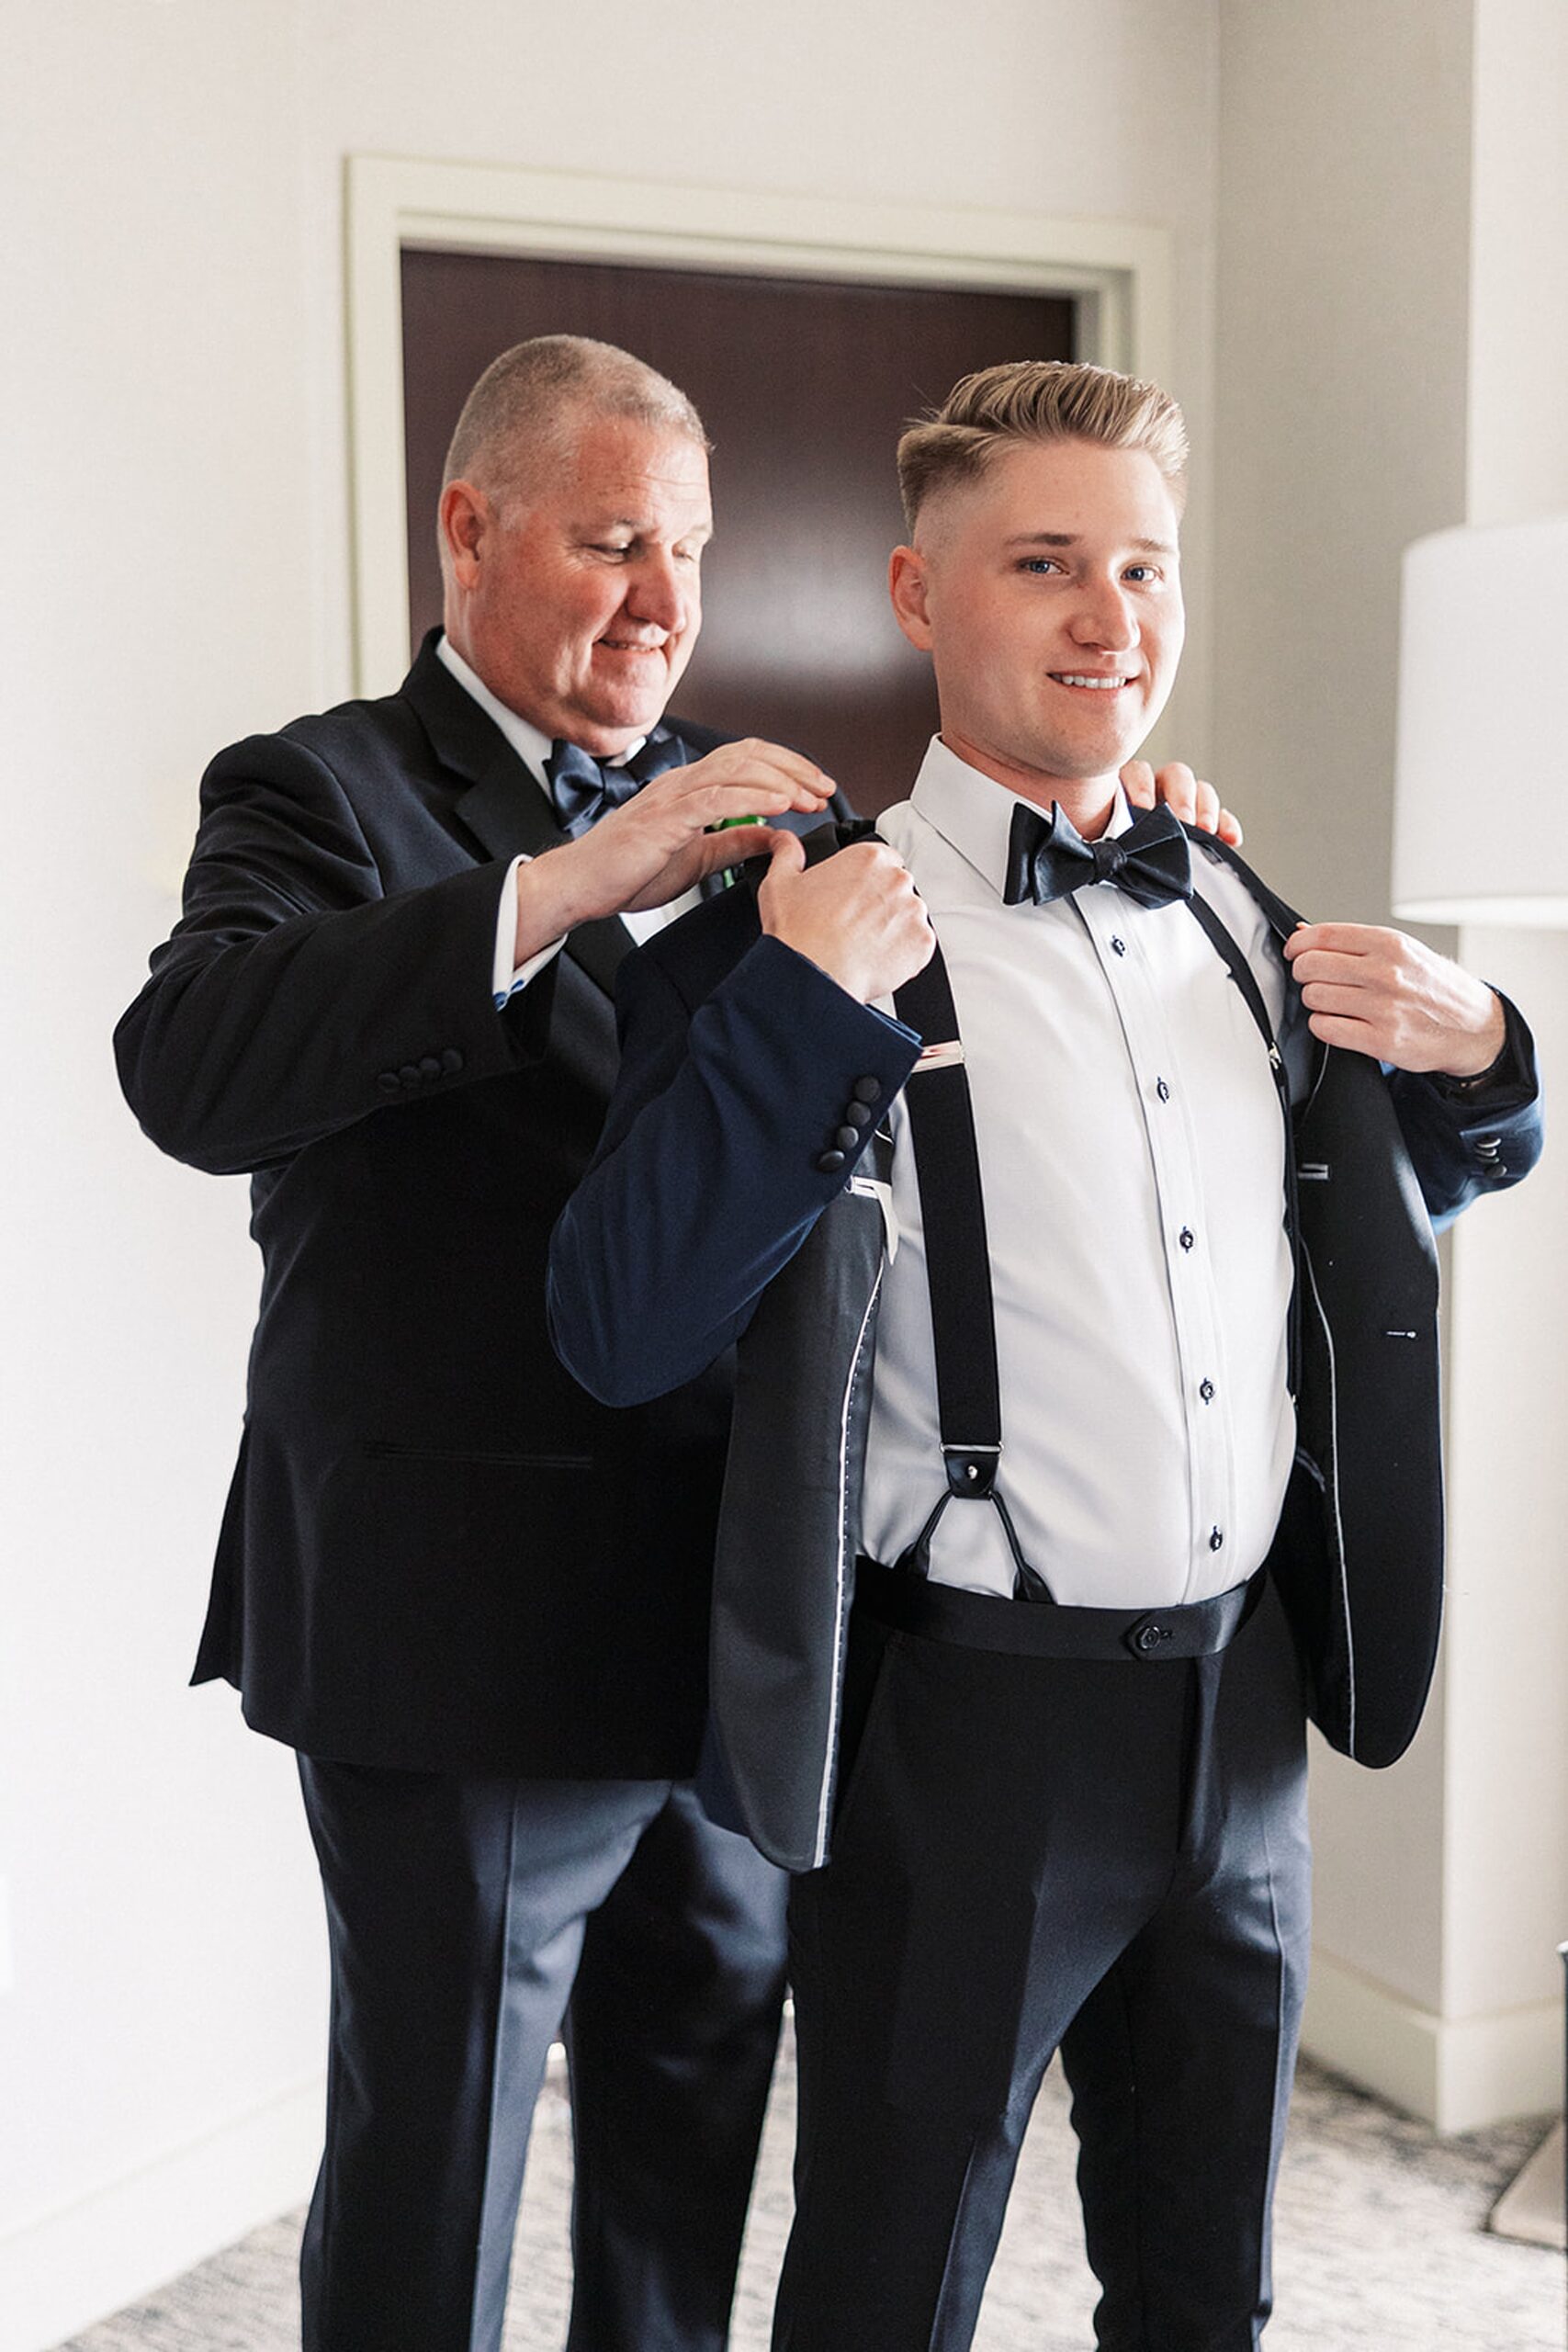 A father helps his son put on a tuxedo jacket while standing in a getting ready room